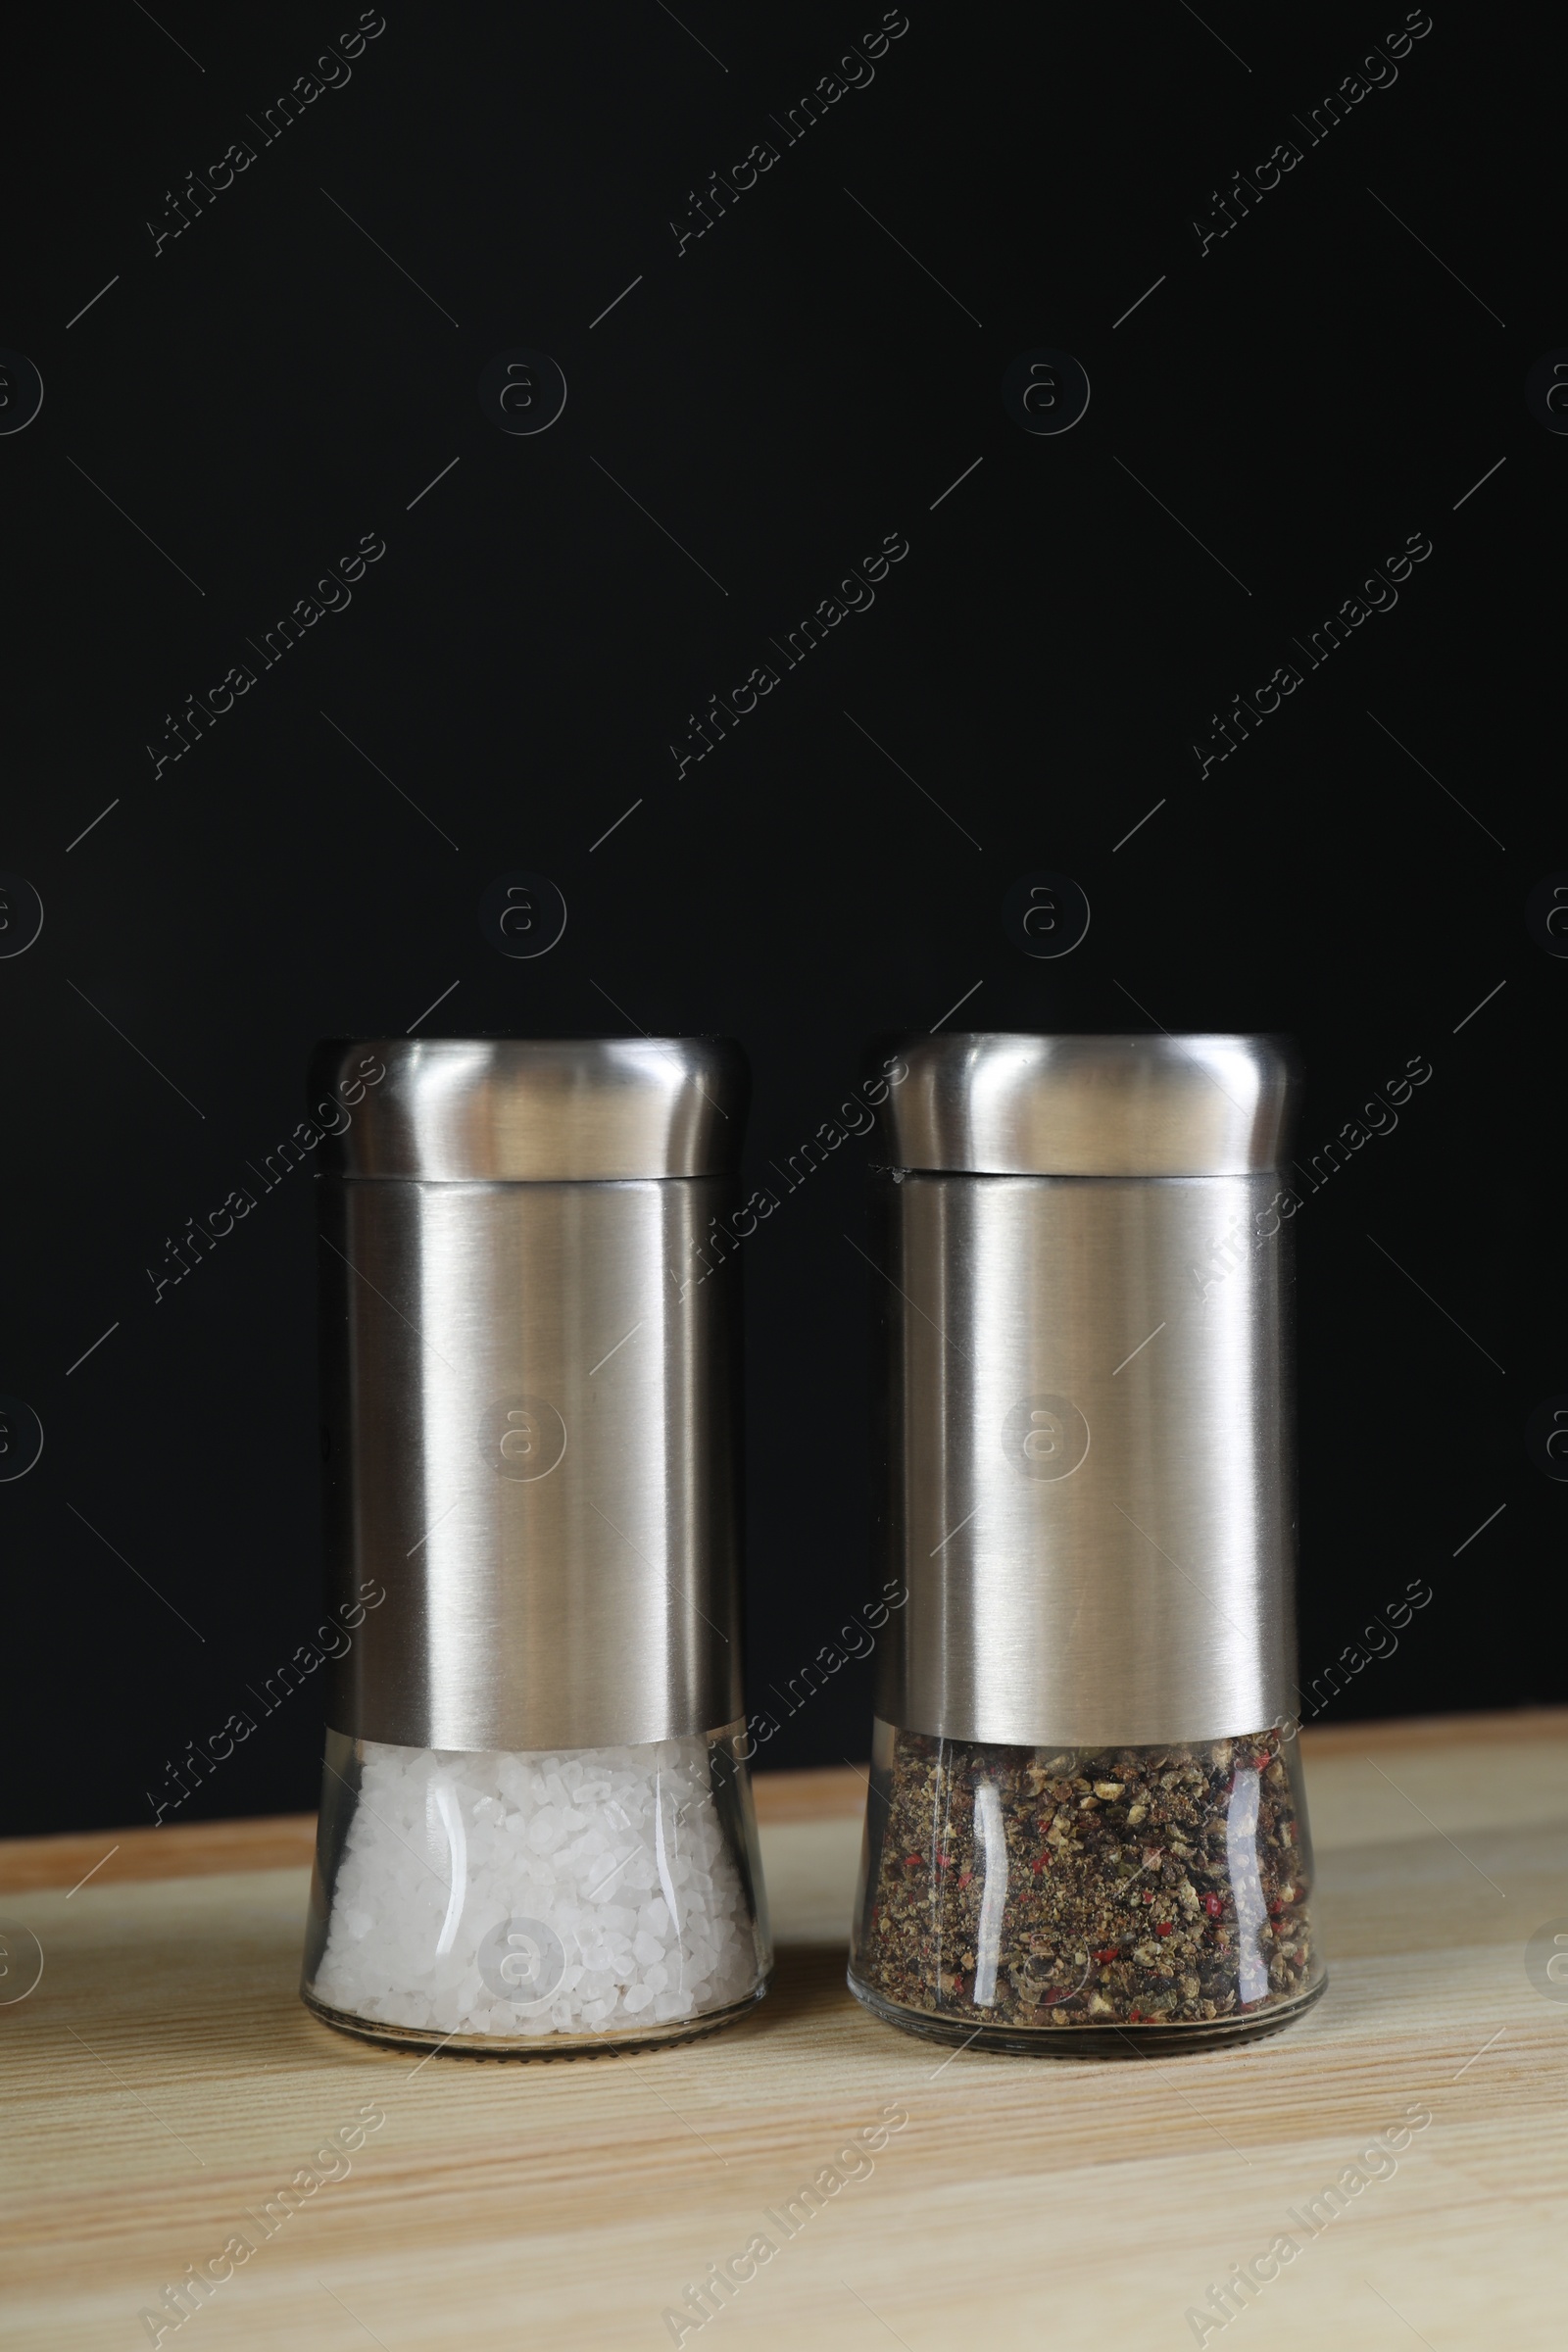 Photo of Salt and pepper shakers on light wooden table against black background. Space for text